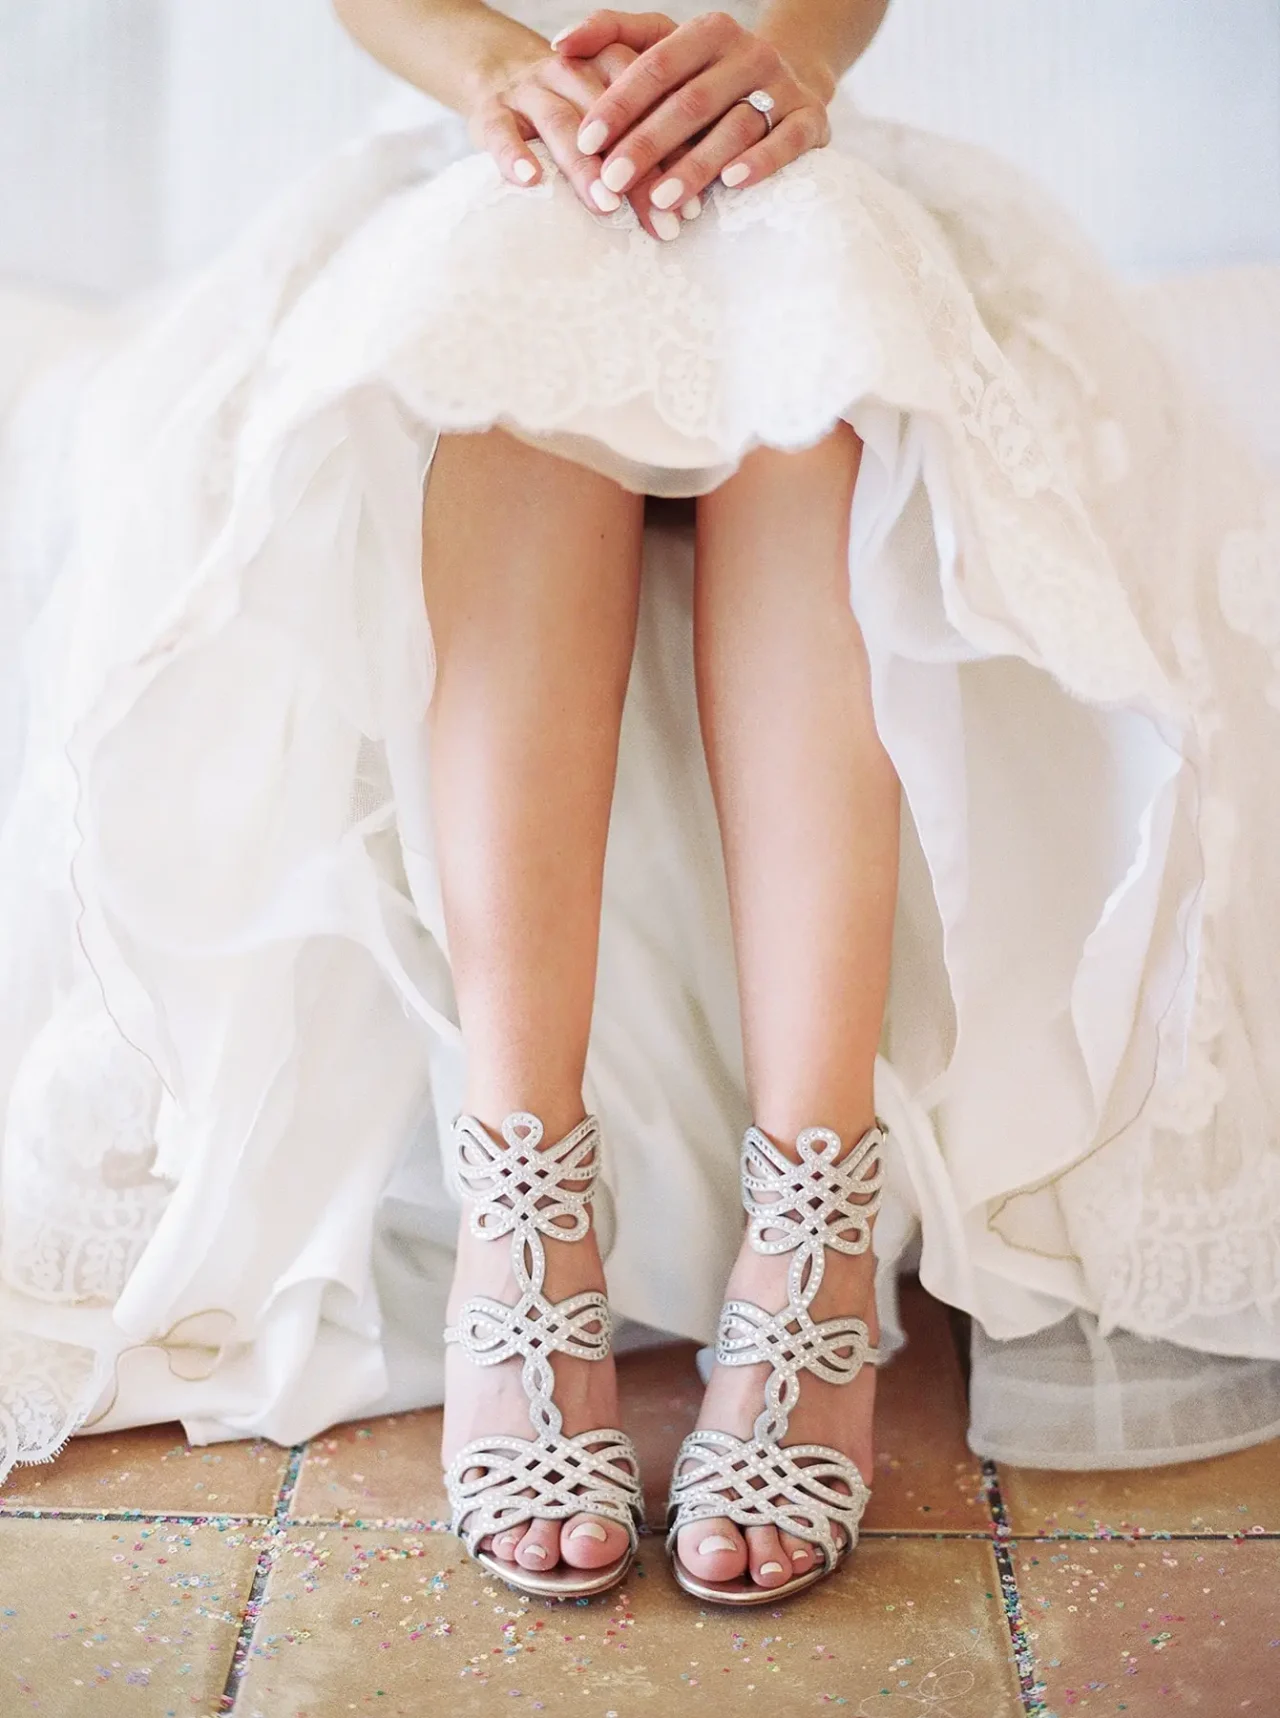 5 Ways To Make The Morning Before Your Wedding Special